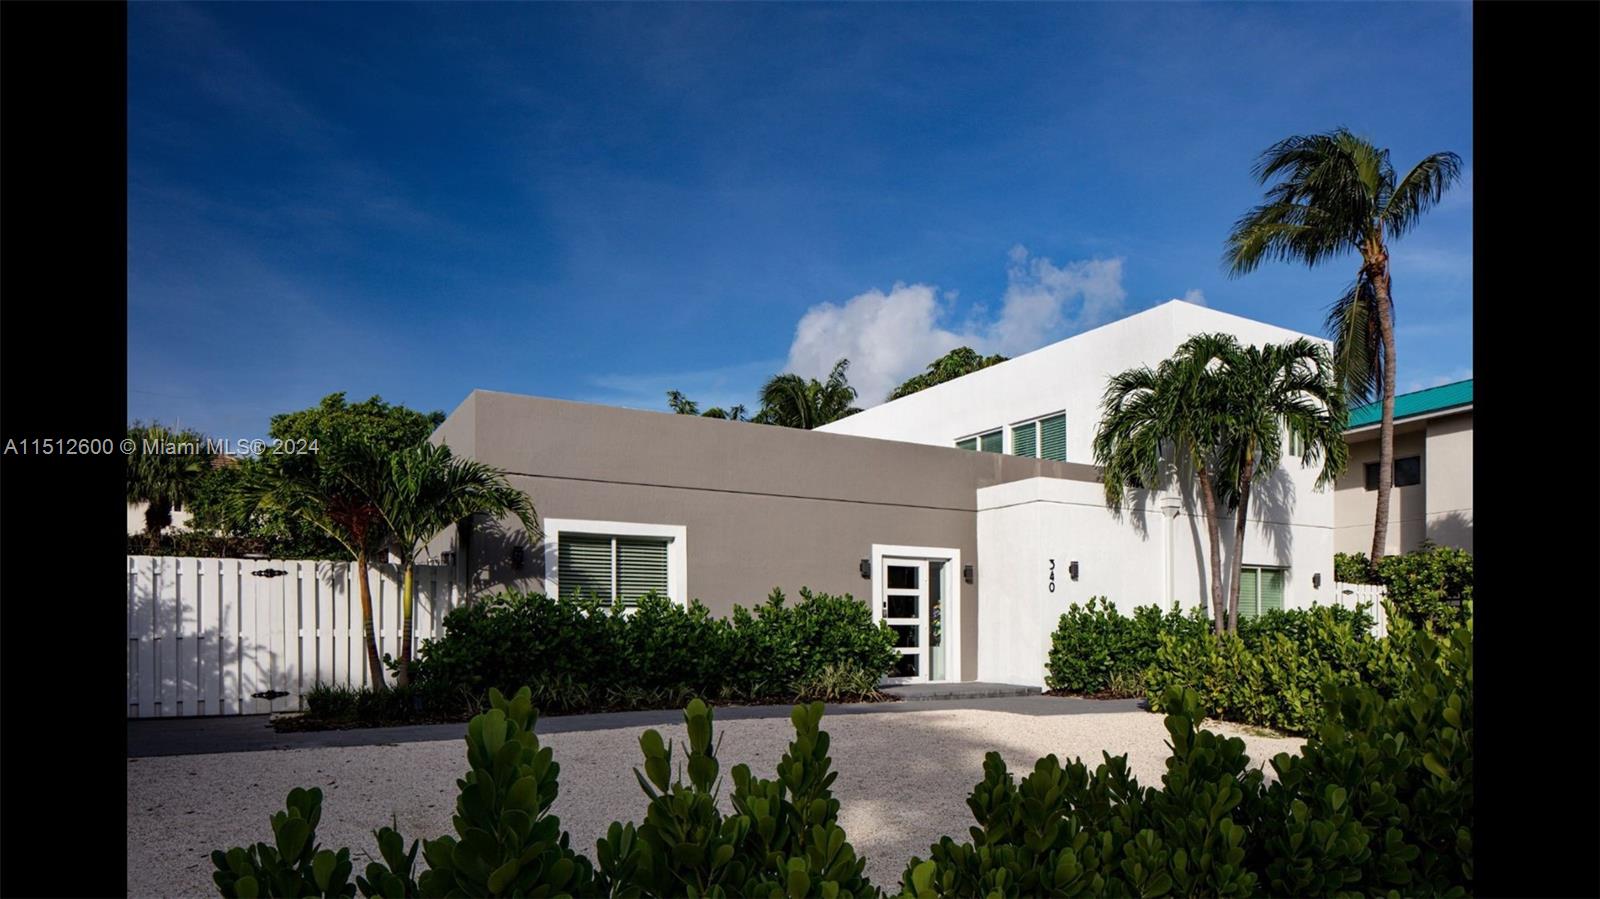 Property for Sale at 340 Ridgewood Rd Rd, Key Biscayne, Miami-Dade County, Florida - Bedrooms: 4 
Bathrooms: 4  - $3,835,000